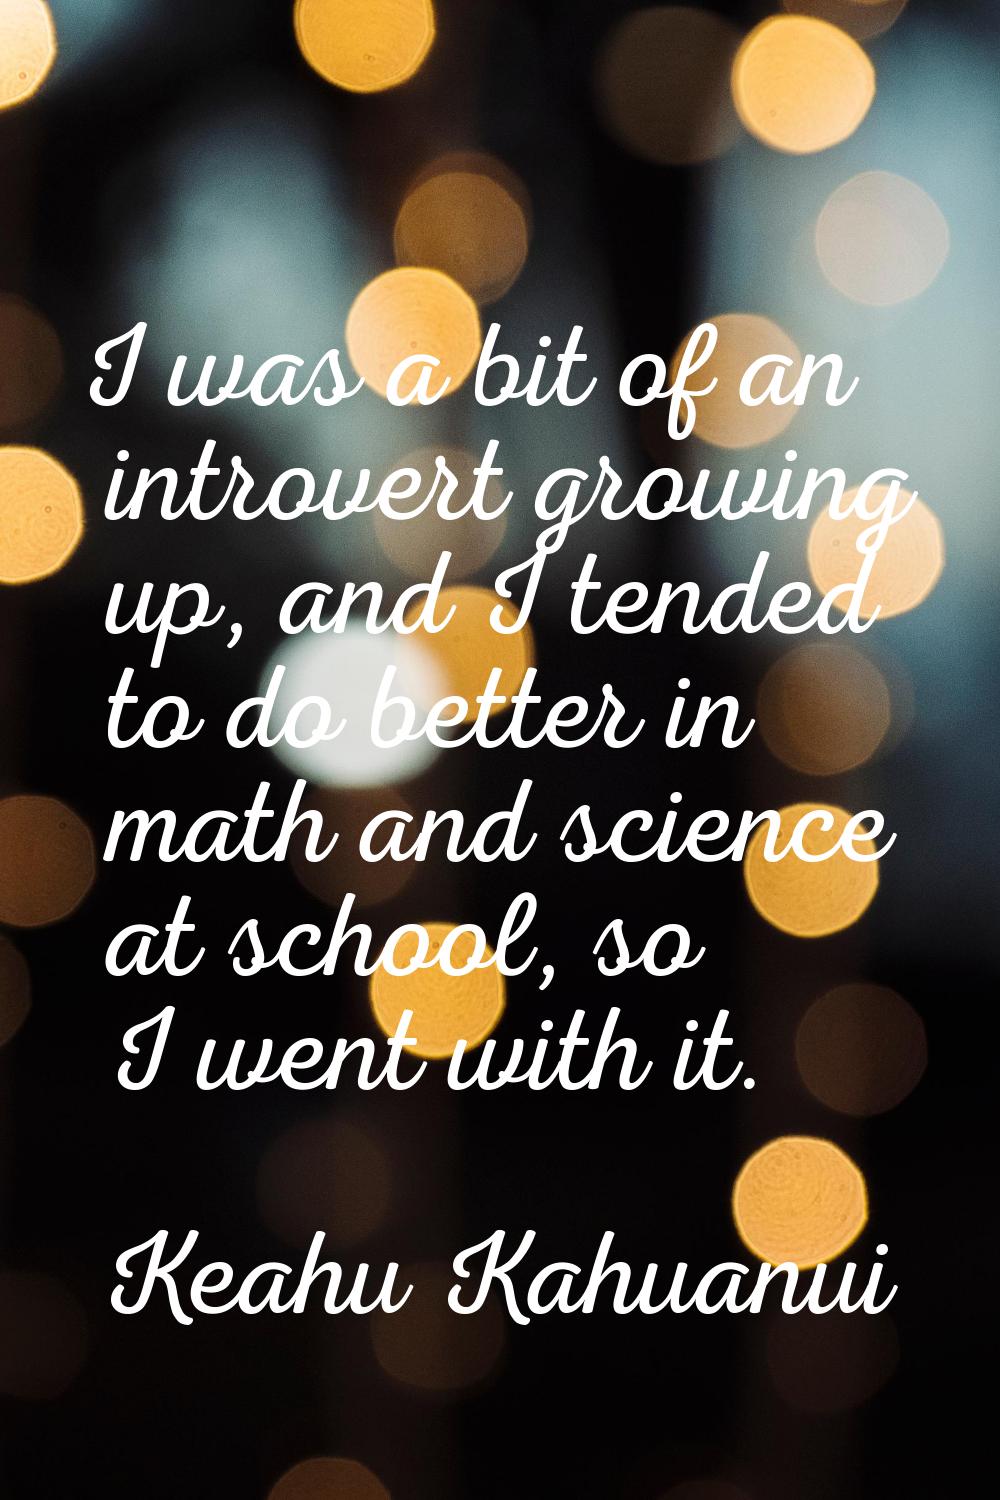 I was a bit of an introvert growing up, and I tended to do better in math and science at school, so